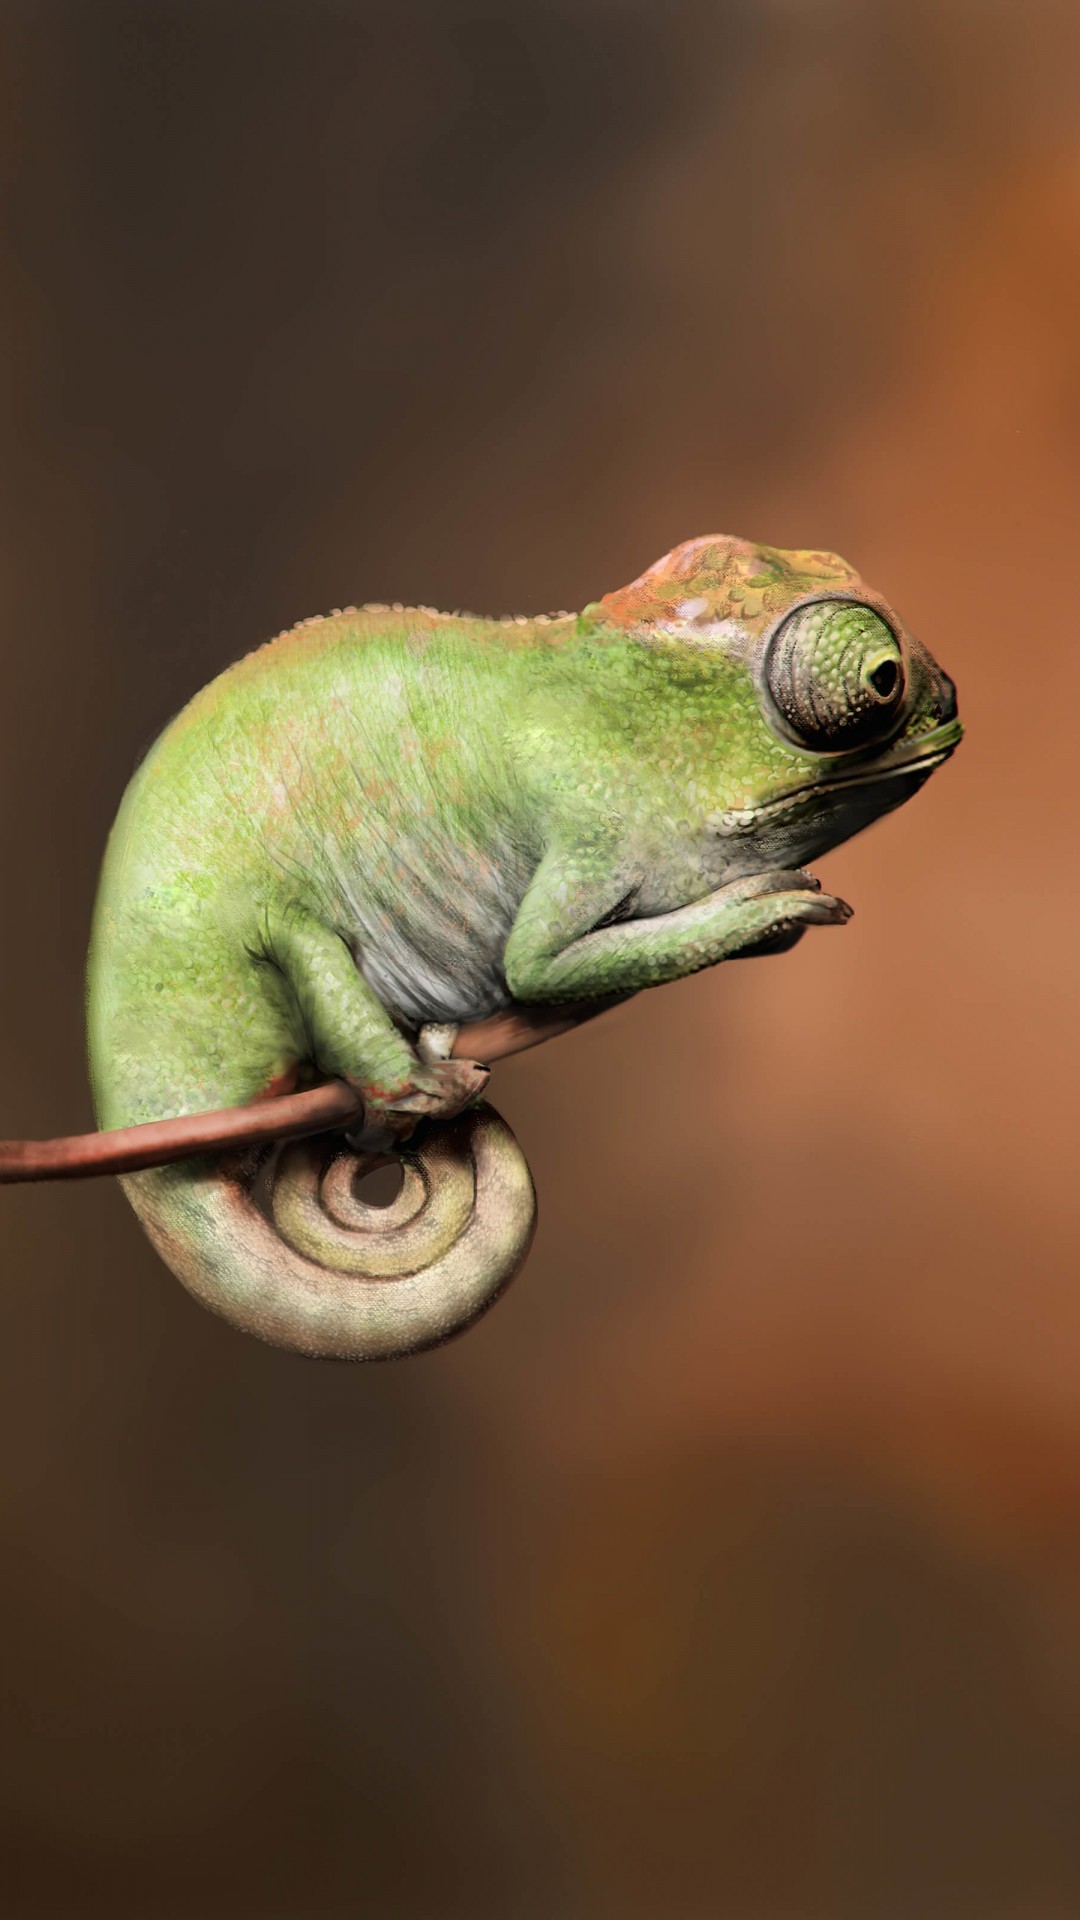 Baby Chameleon Perching On a Twisted Branch Wallpaper for SONY Xperia Z3